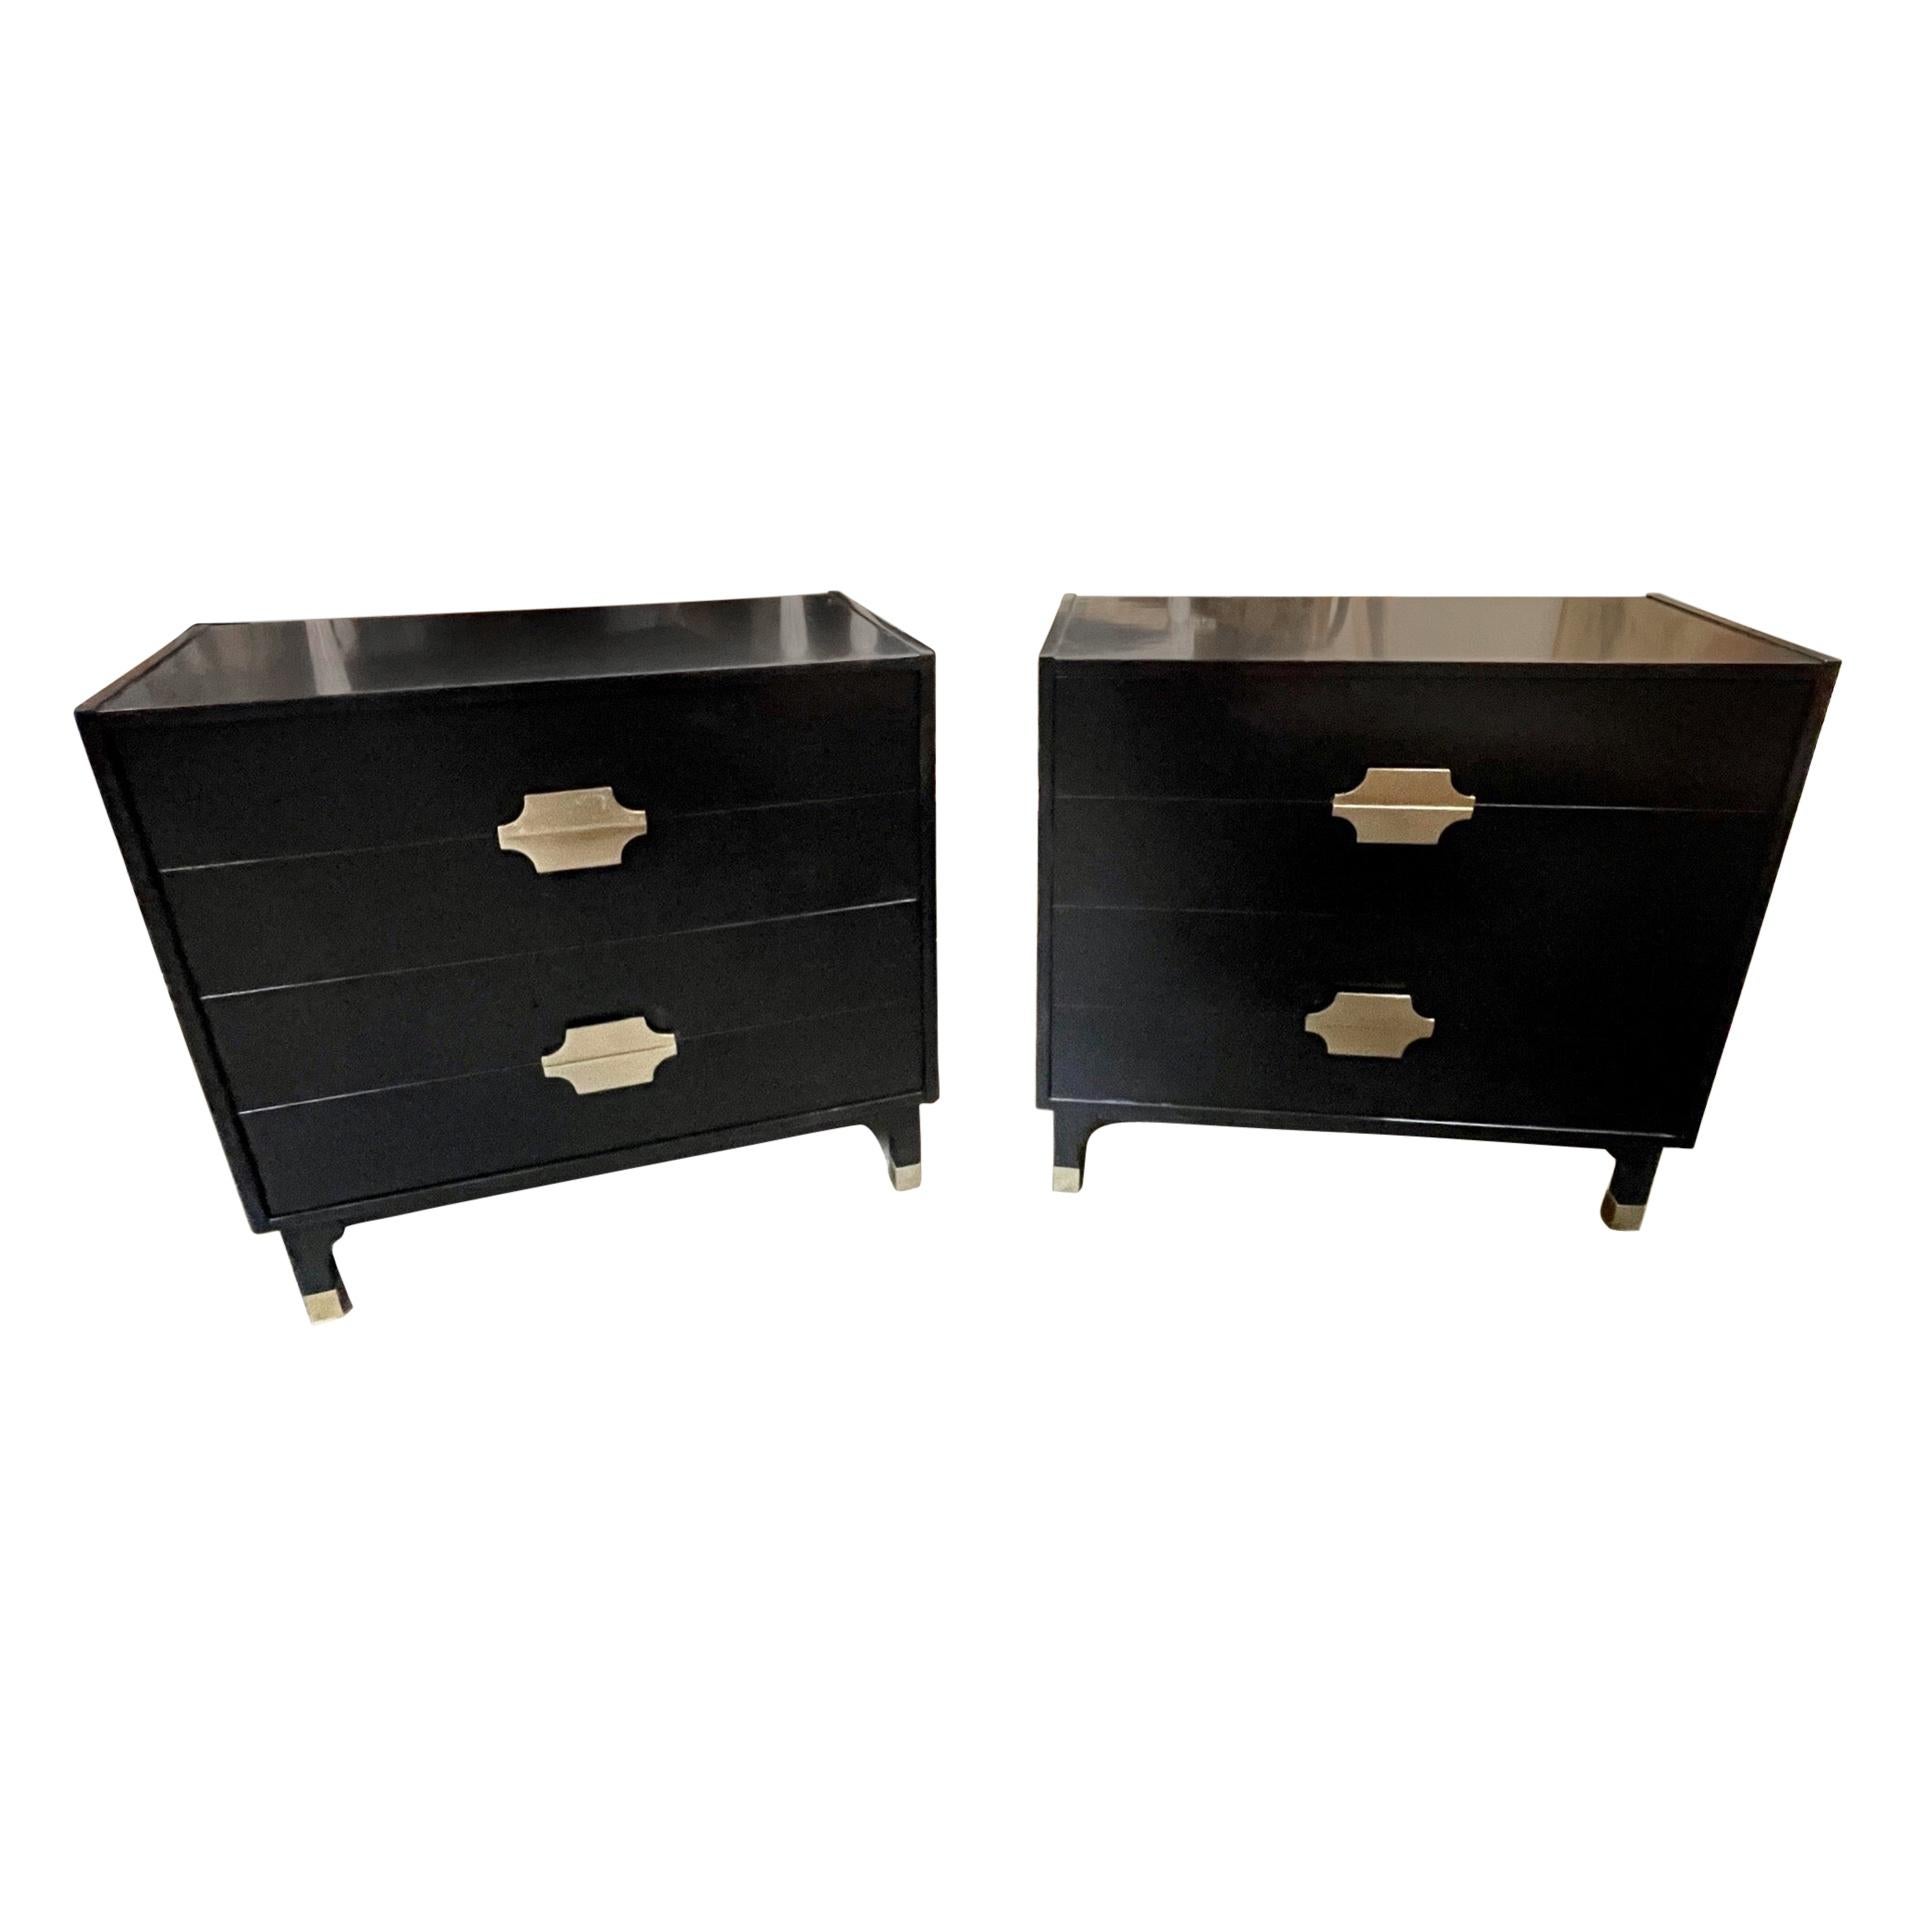 Modern Black Lacquered Bedside Tables from Italy